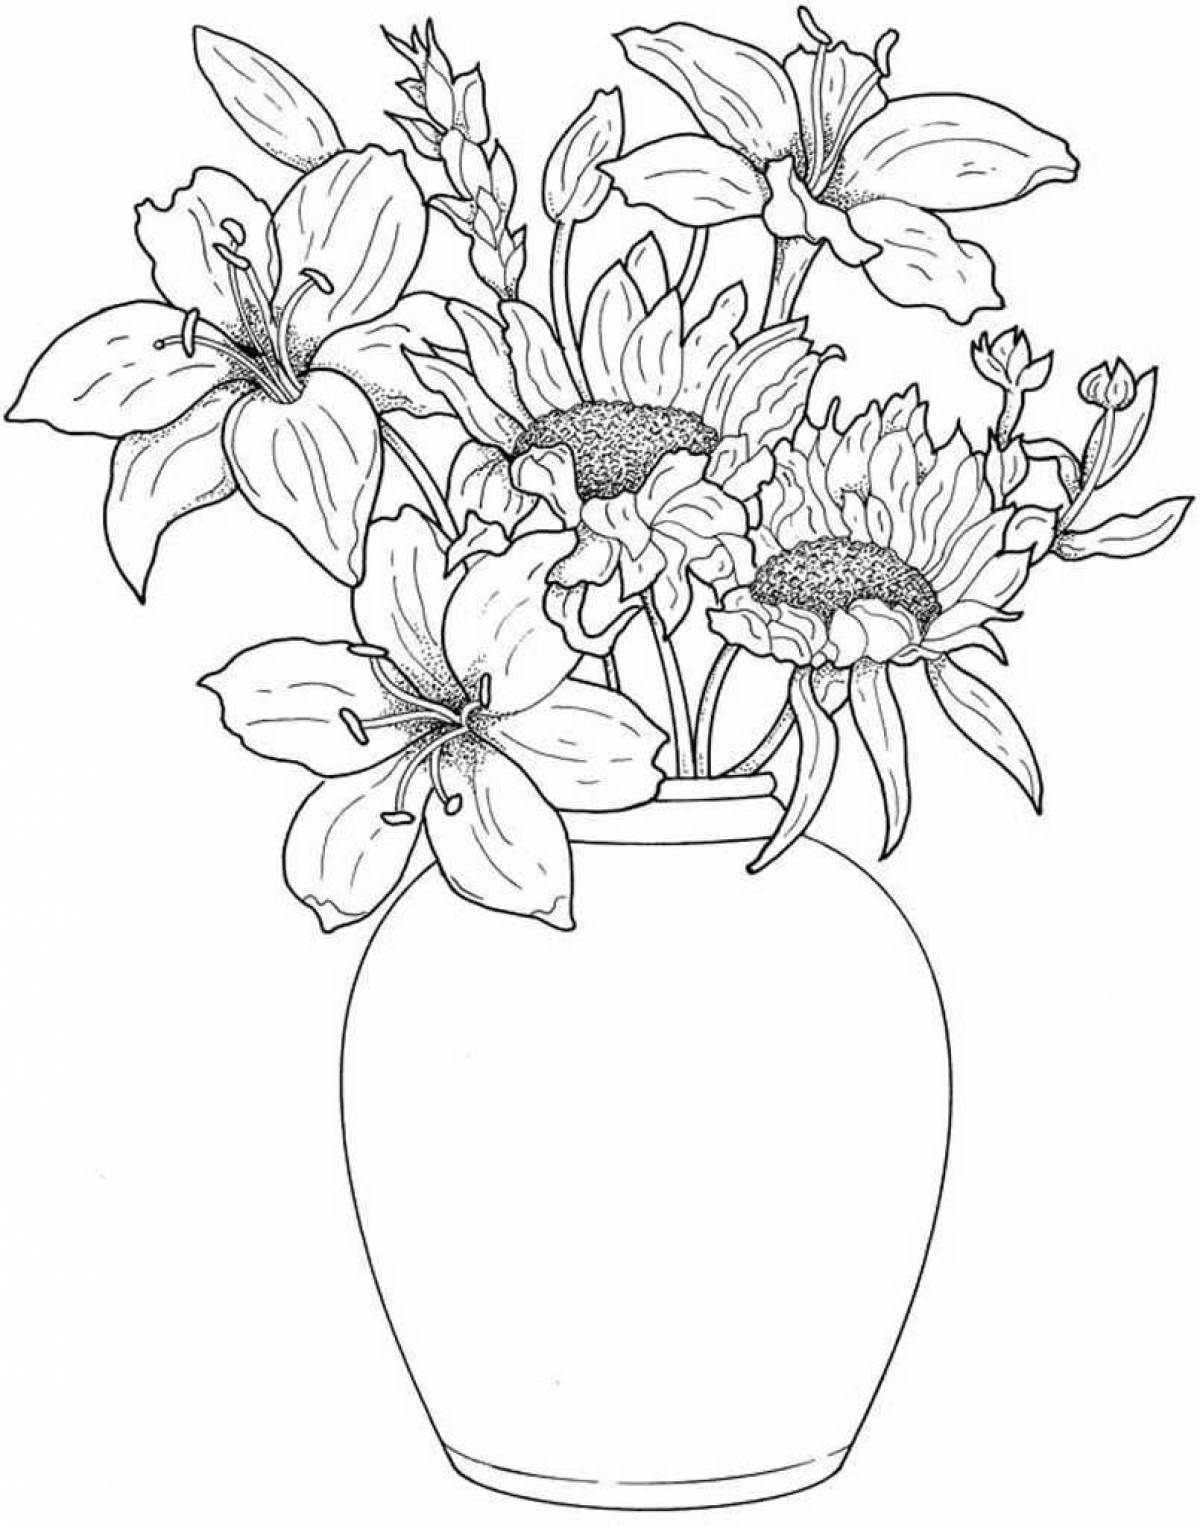 Charming bouquet of flowers in a vase coloring book